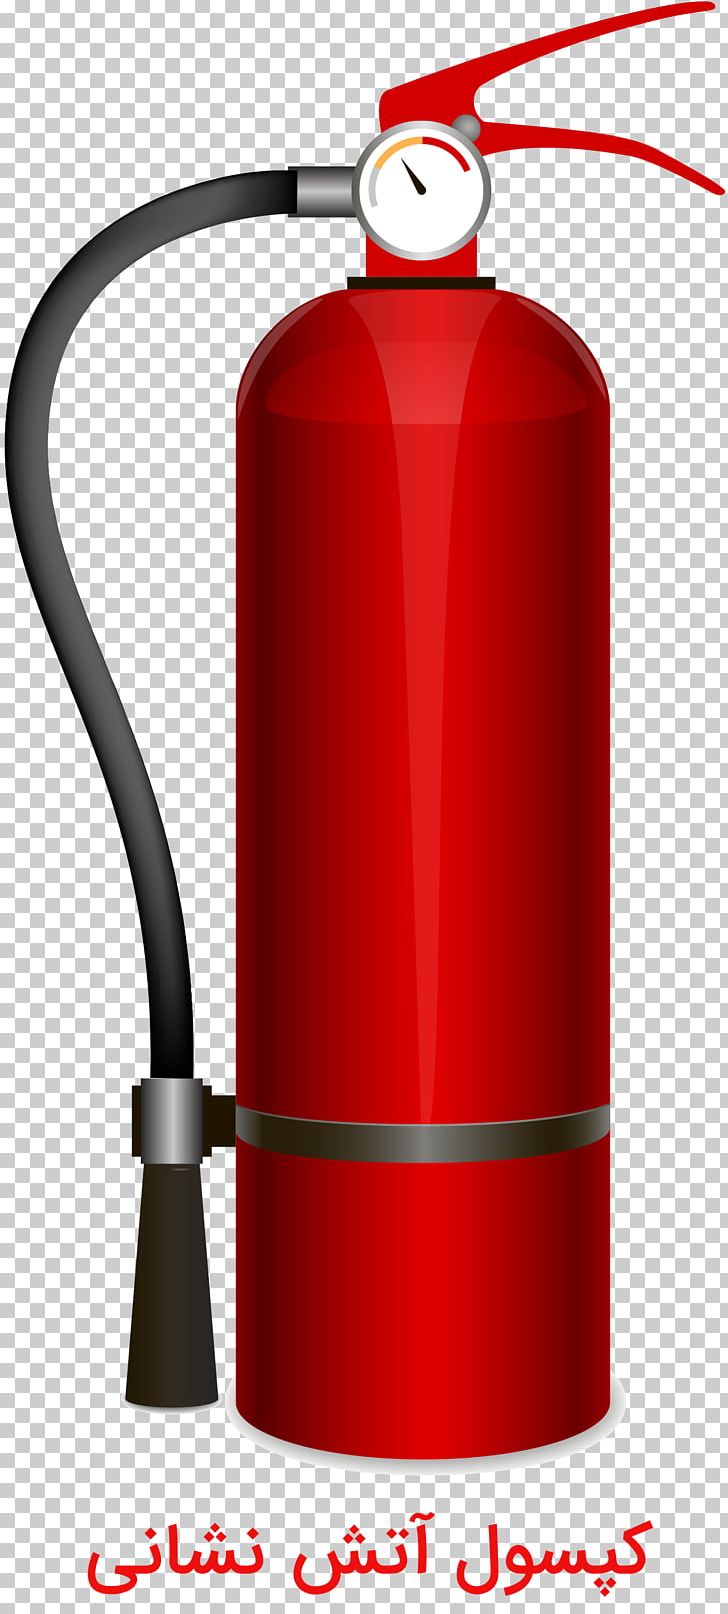 Fire Extinguishers Active Fire Protection Conflagration PNG, Clipart, Active Fire Protection, Conflagration, Cylinder, Equipamento, Extinguisher Free PNG Download